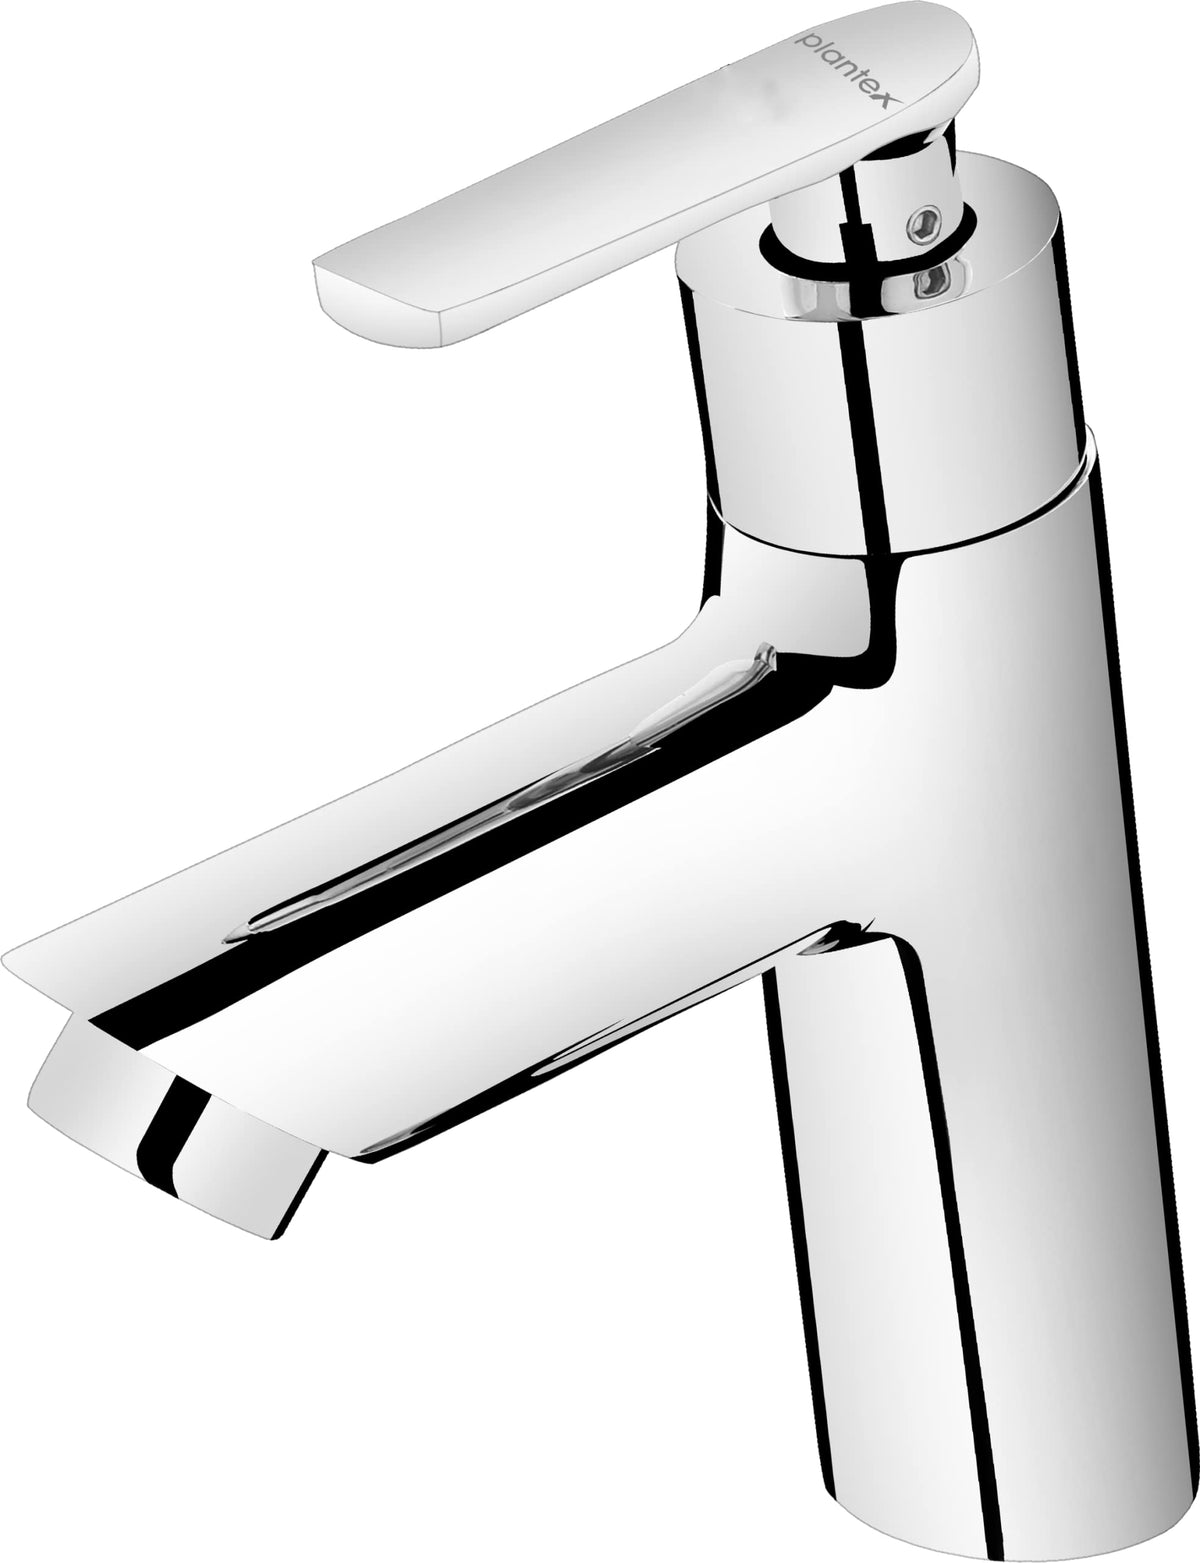 Plantex Pure Brass BAL-503 Single Lever Pillar Cock/Table Top Wash Basin Tap for Bathroom/Kitchen Sink Faucet with Teflon Tape (Mirror-Chrome Finish)